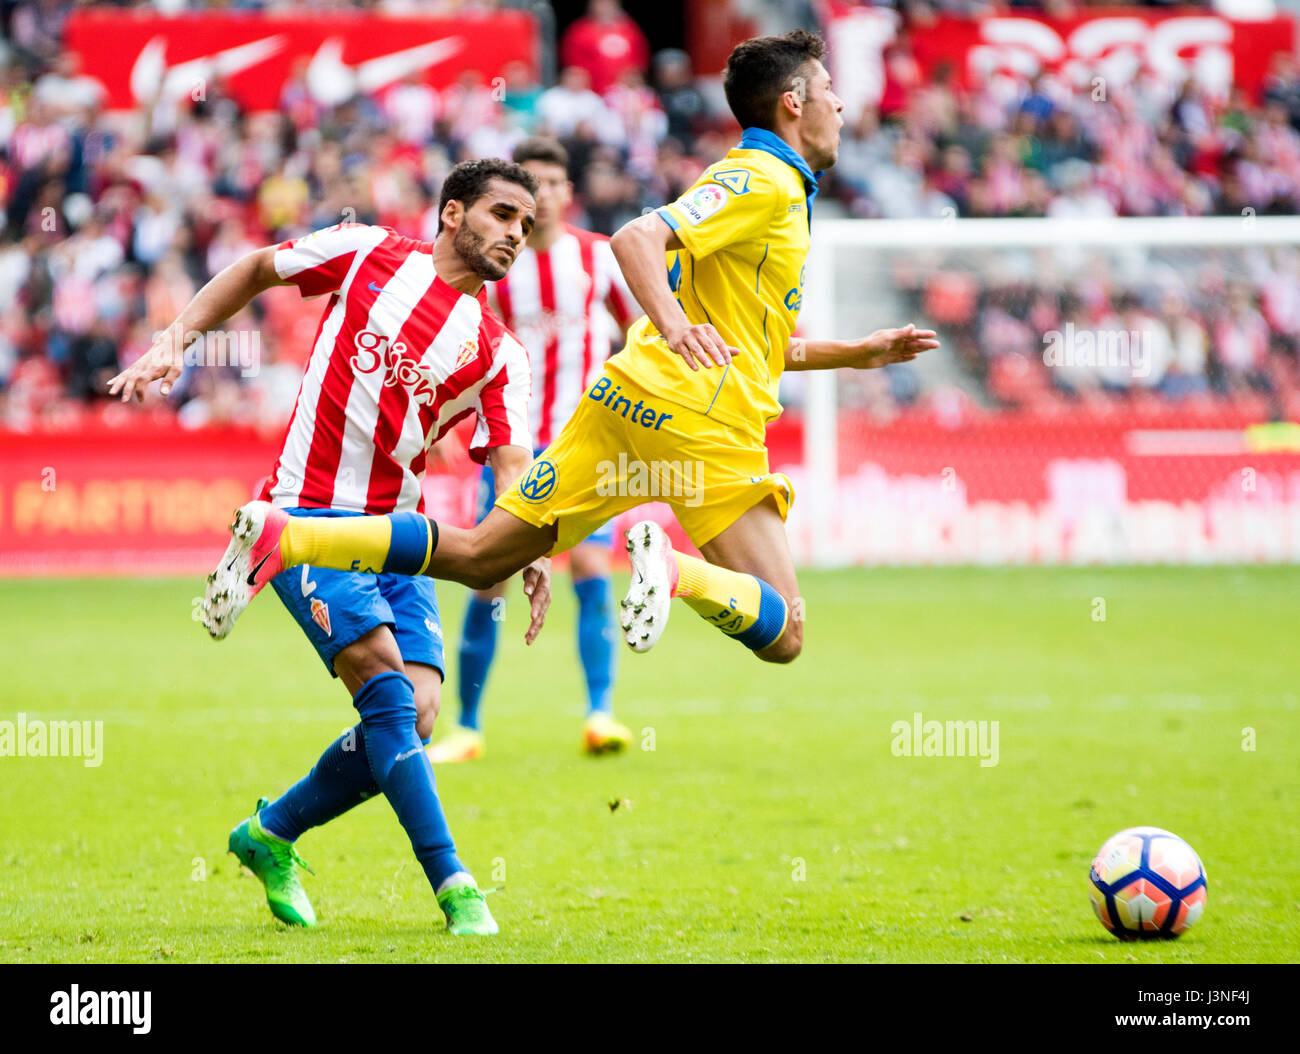 Gijon, Spain. 6th May, 2017. Mateo Garcia (Mildfierder, UD Las Palmas)  falls down after he received a foul from Douglas Pereira (Defender, Sporting  Gijon) during the football match of Season 2016/2017 of